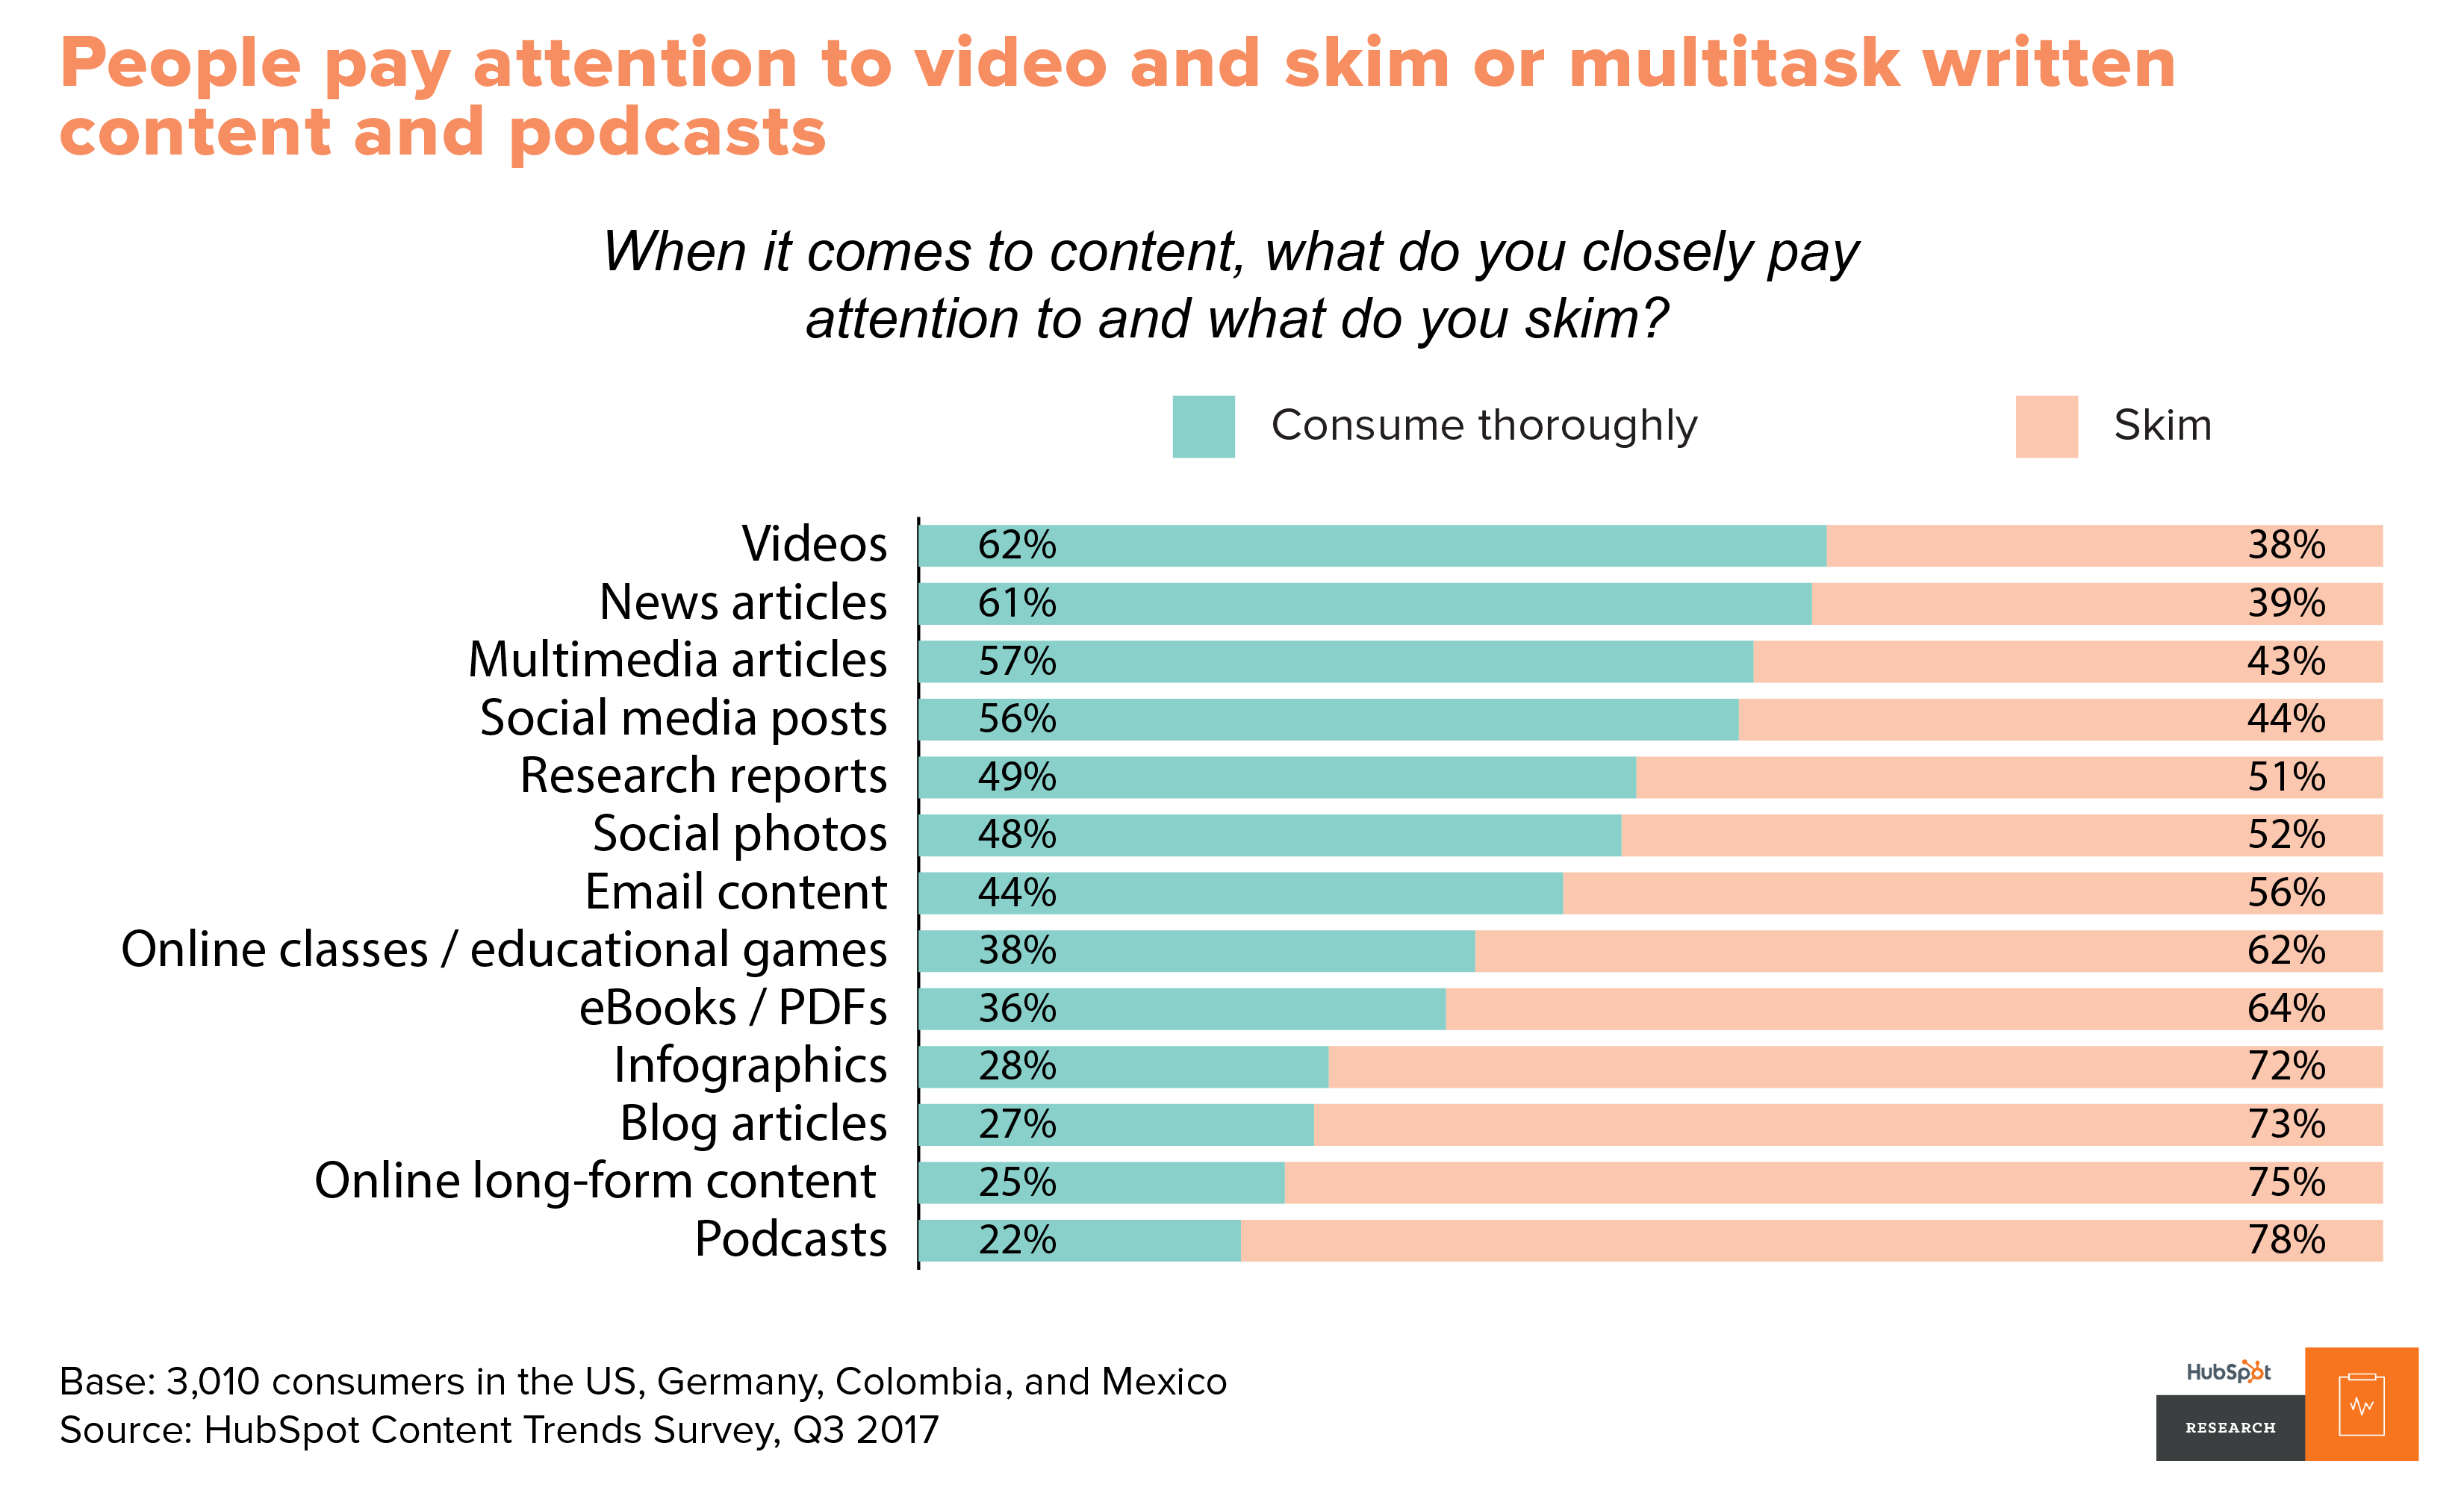 People pay attention to video and skim written content